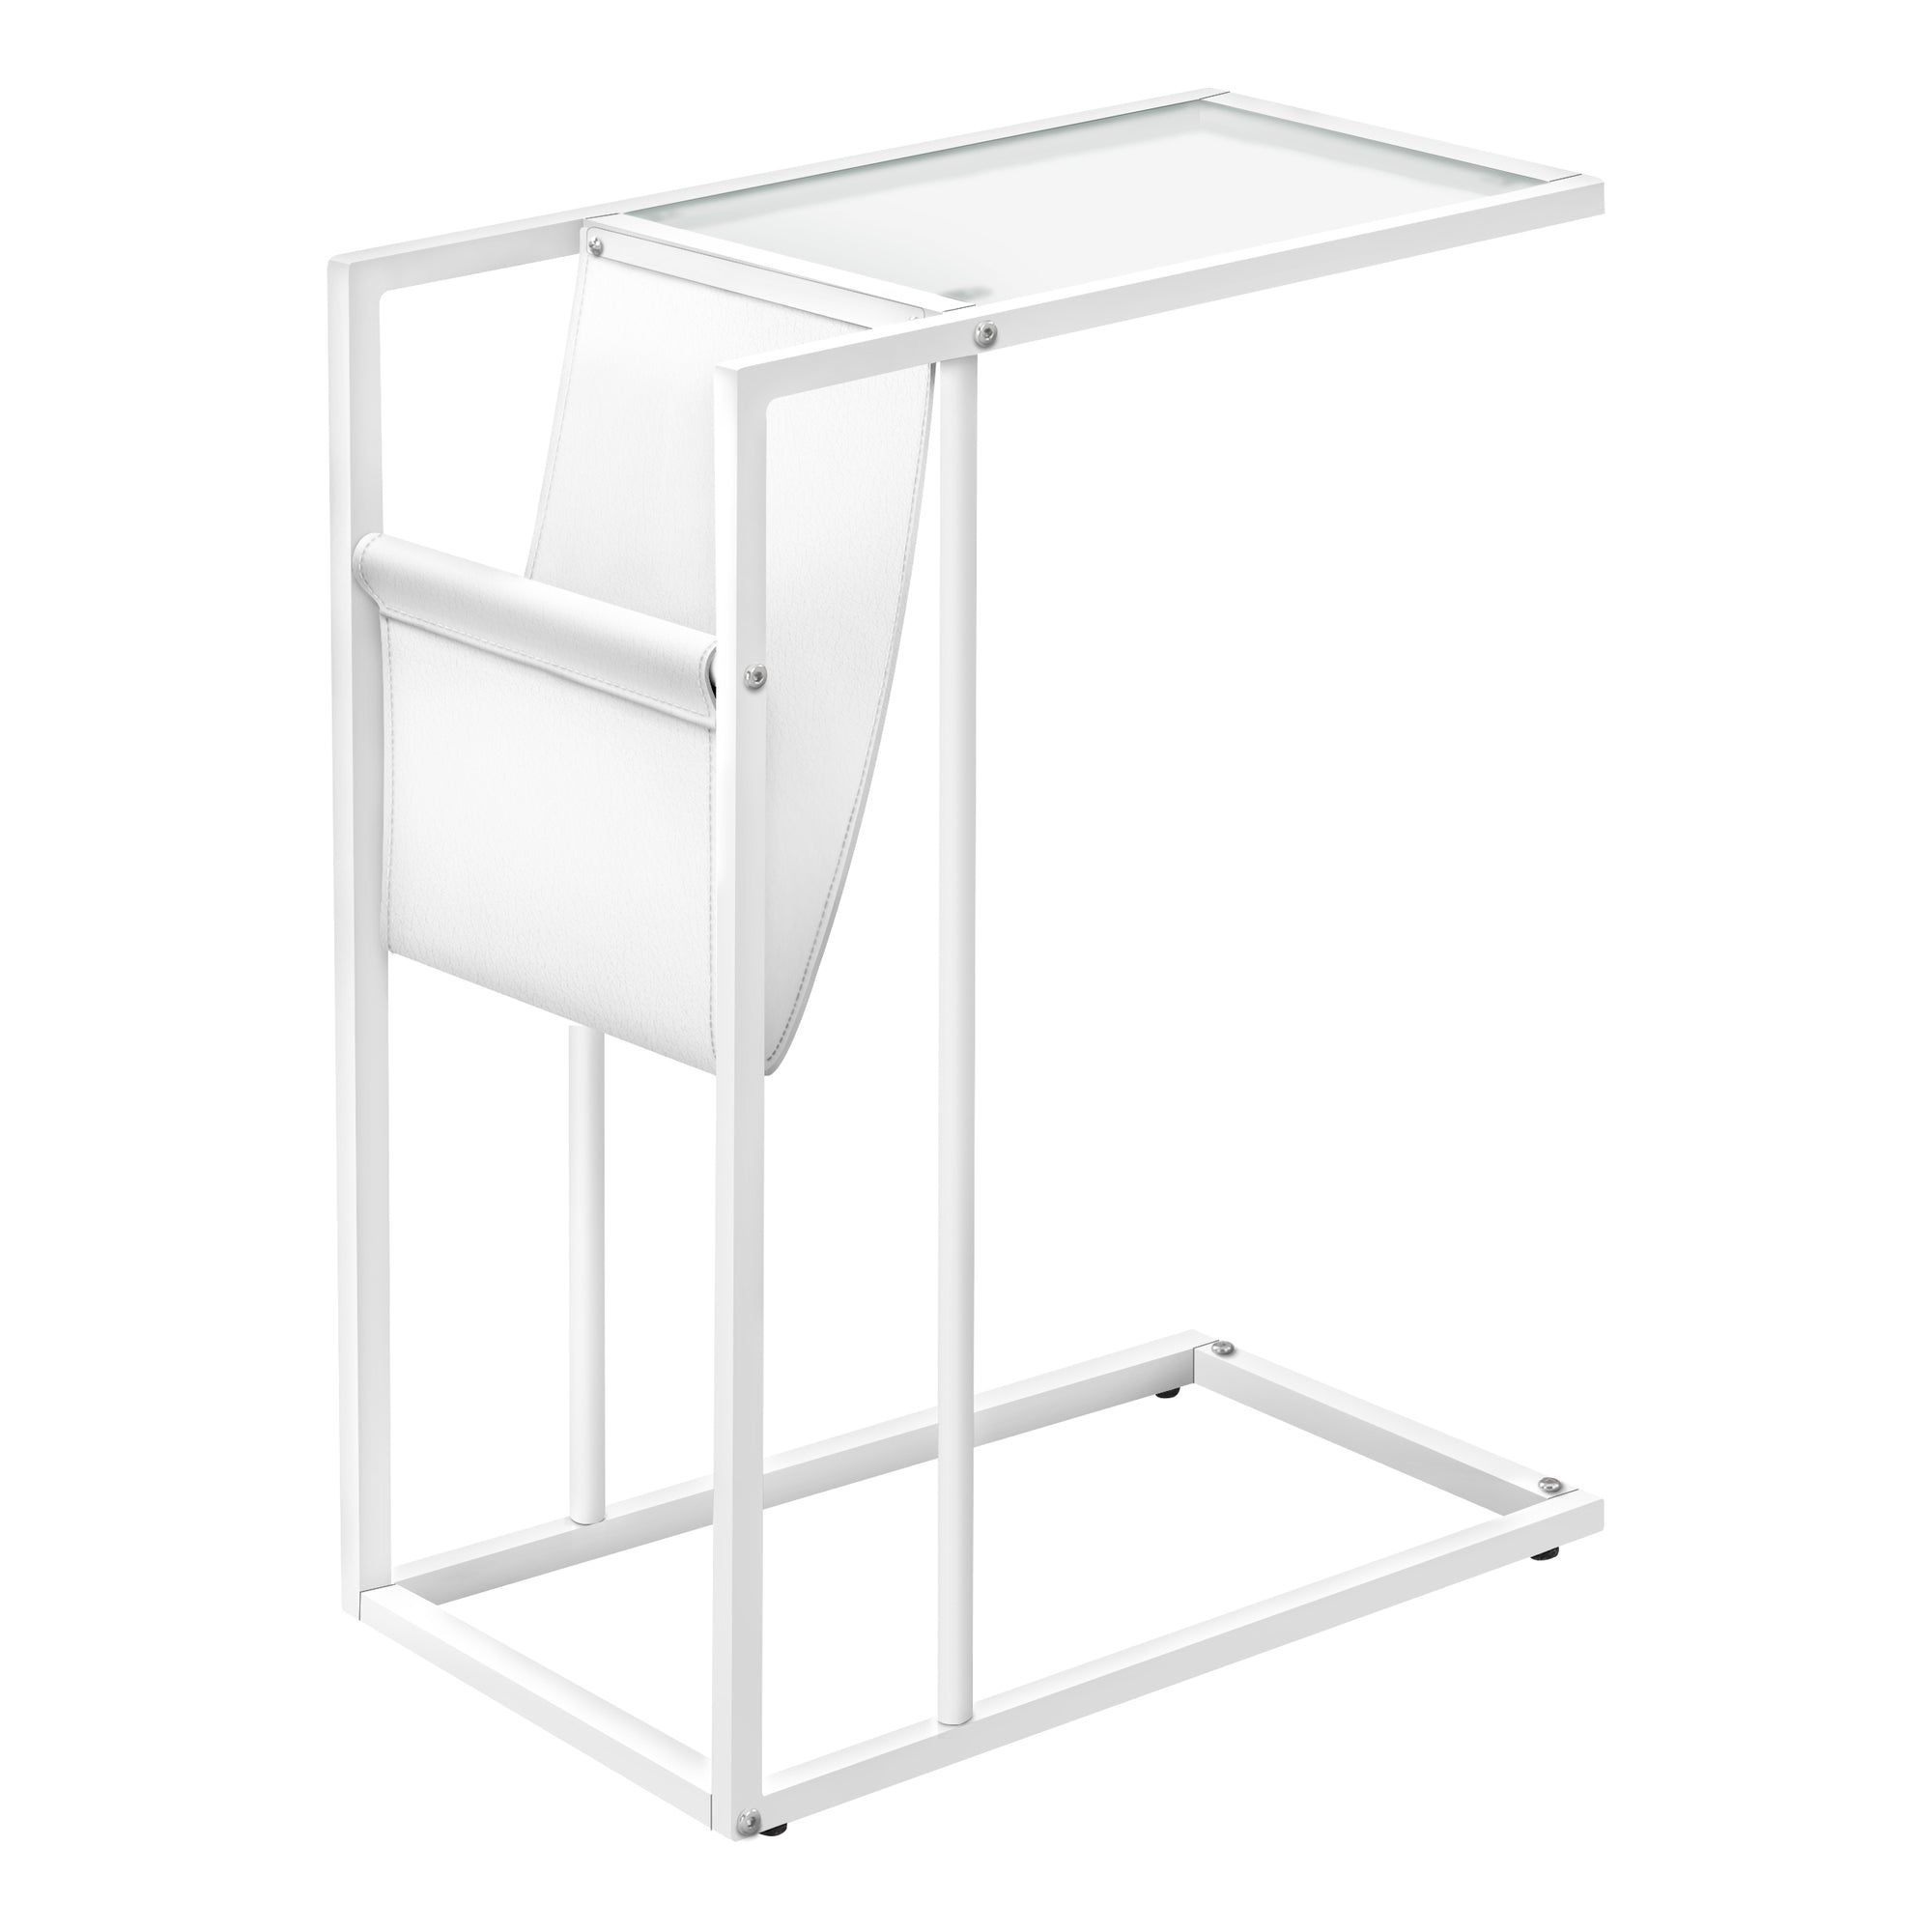 MN-133067    Accent Table, C-Shaped, End, Side, Snack, Living Room, Bedroom, Magazine Storage, Metal Legs, Leather Look, Tempered Glass, White, Chrome, Contemporary, Modern